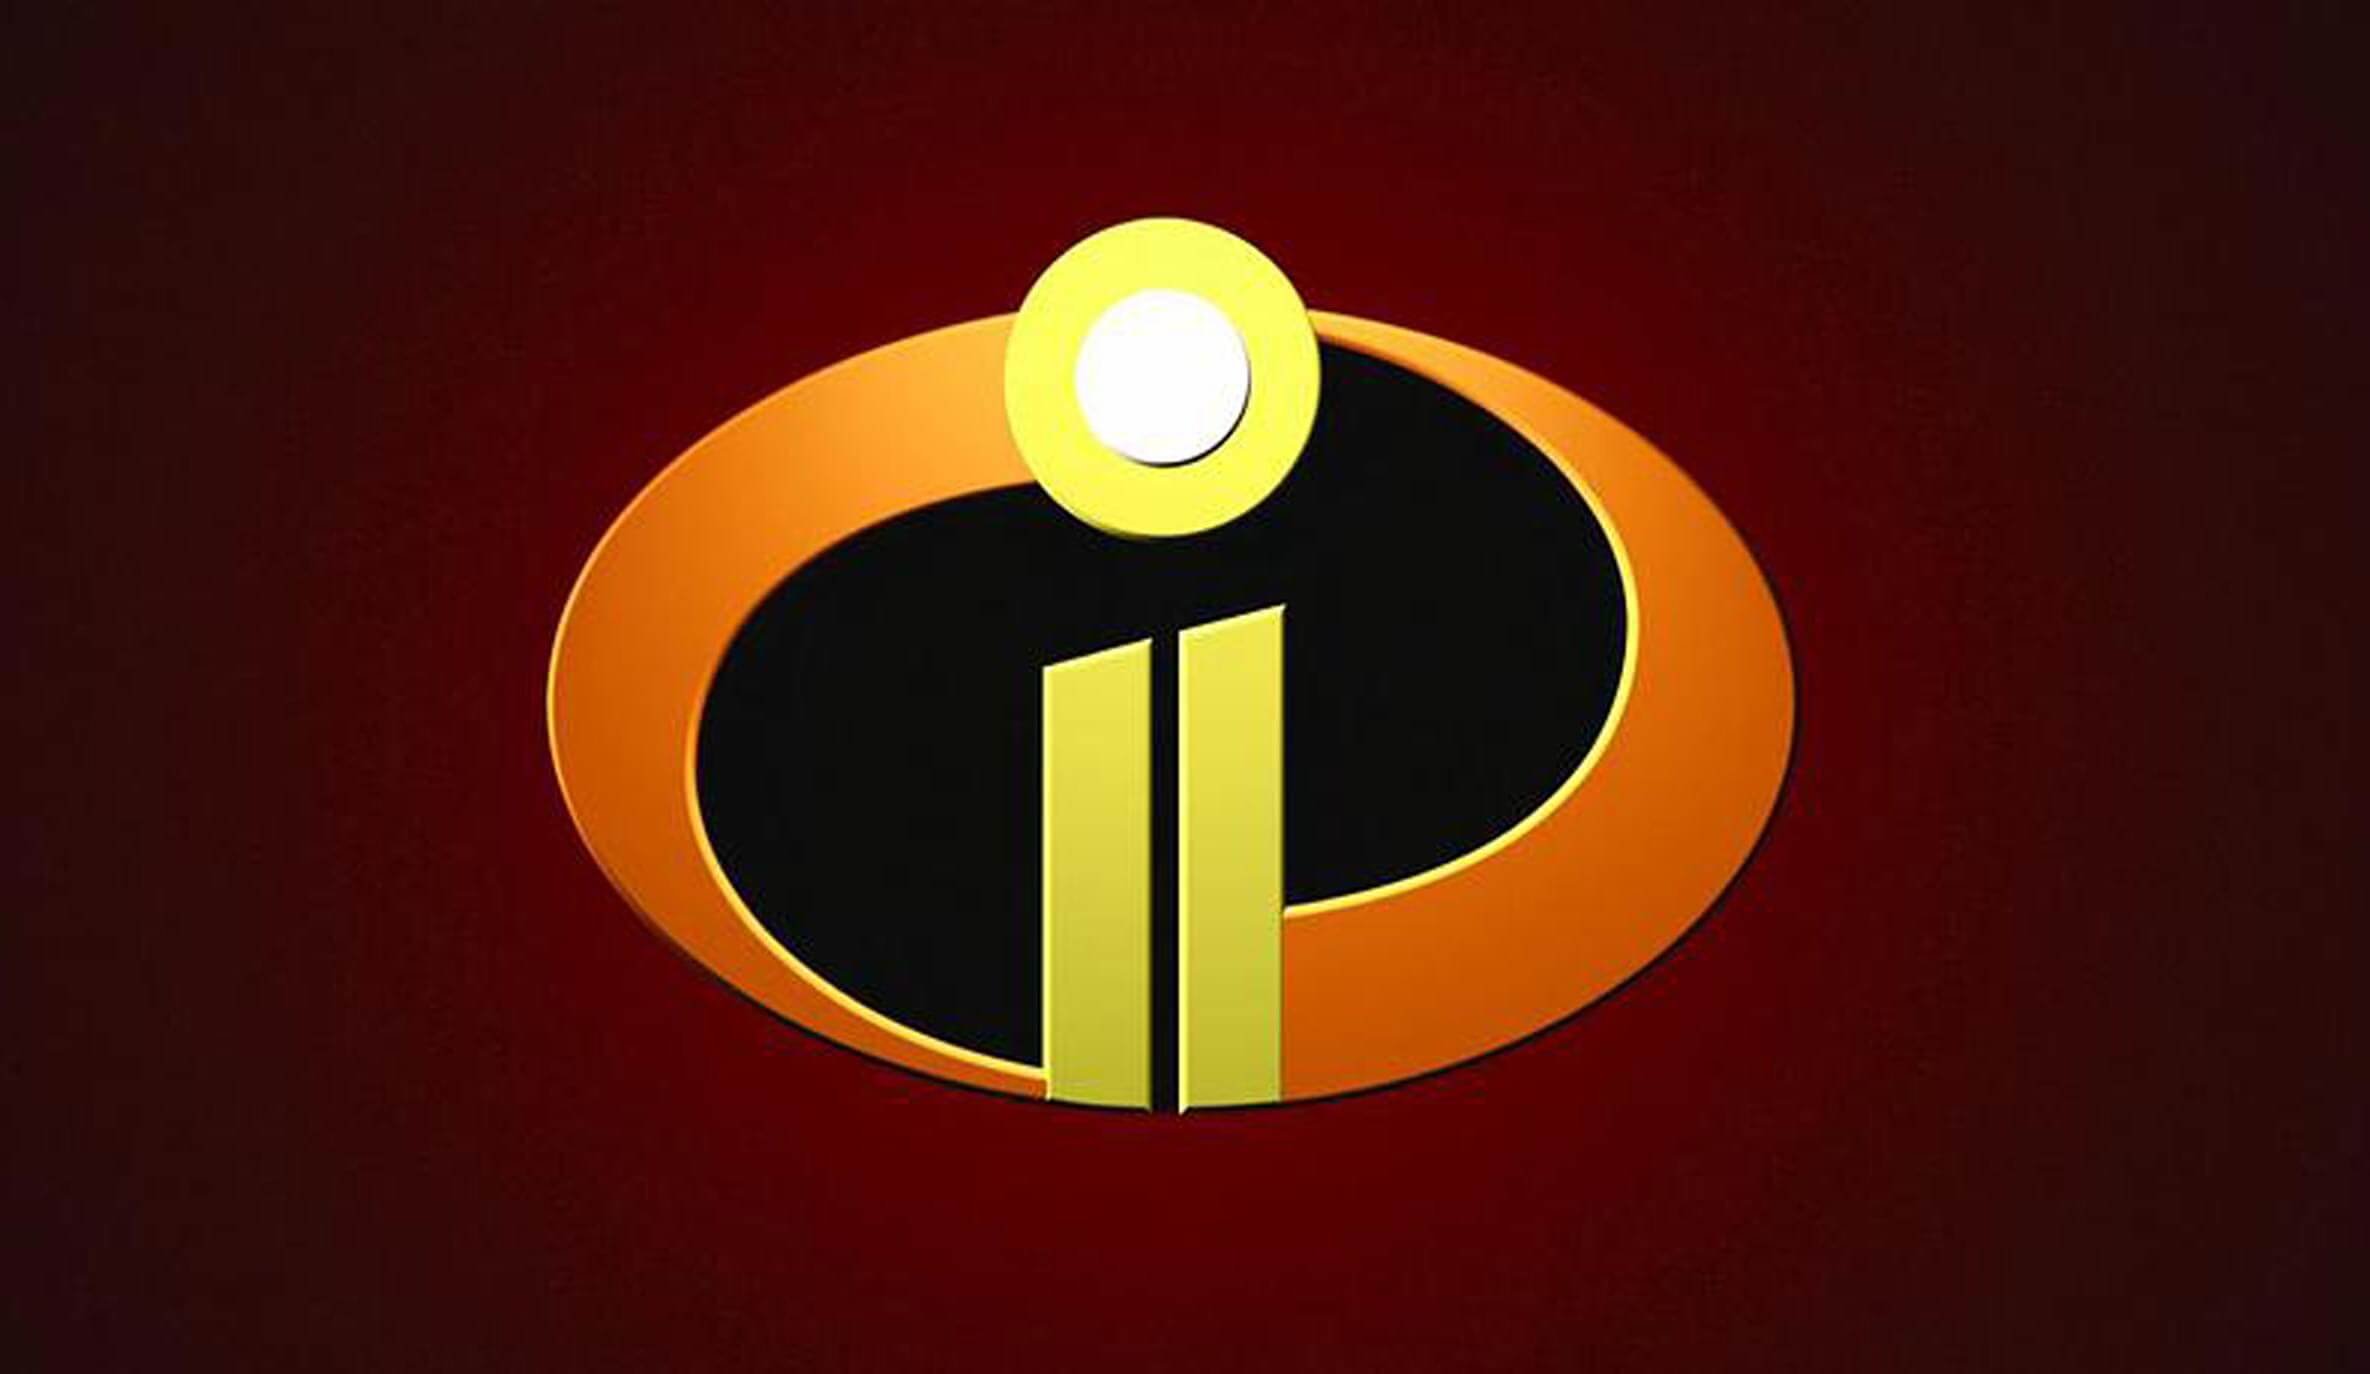 Latest 'Incredibles 2' Trailer Pits The Superhero Family Against A Mysterious New Villain